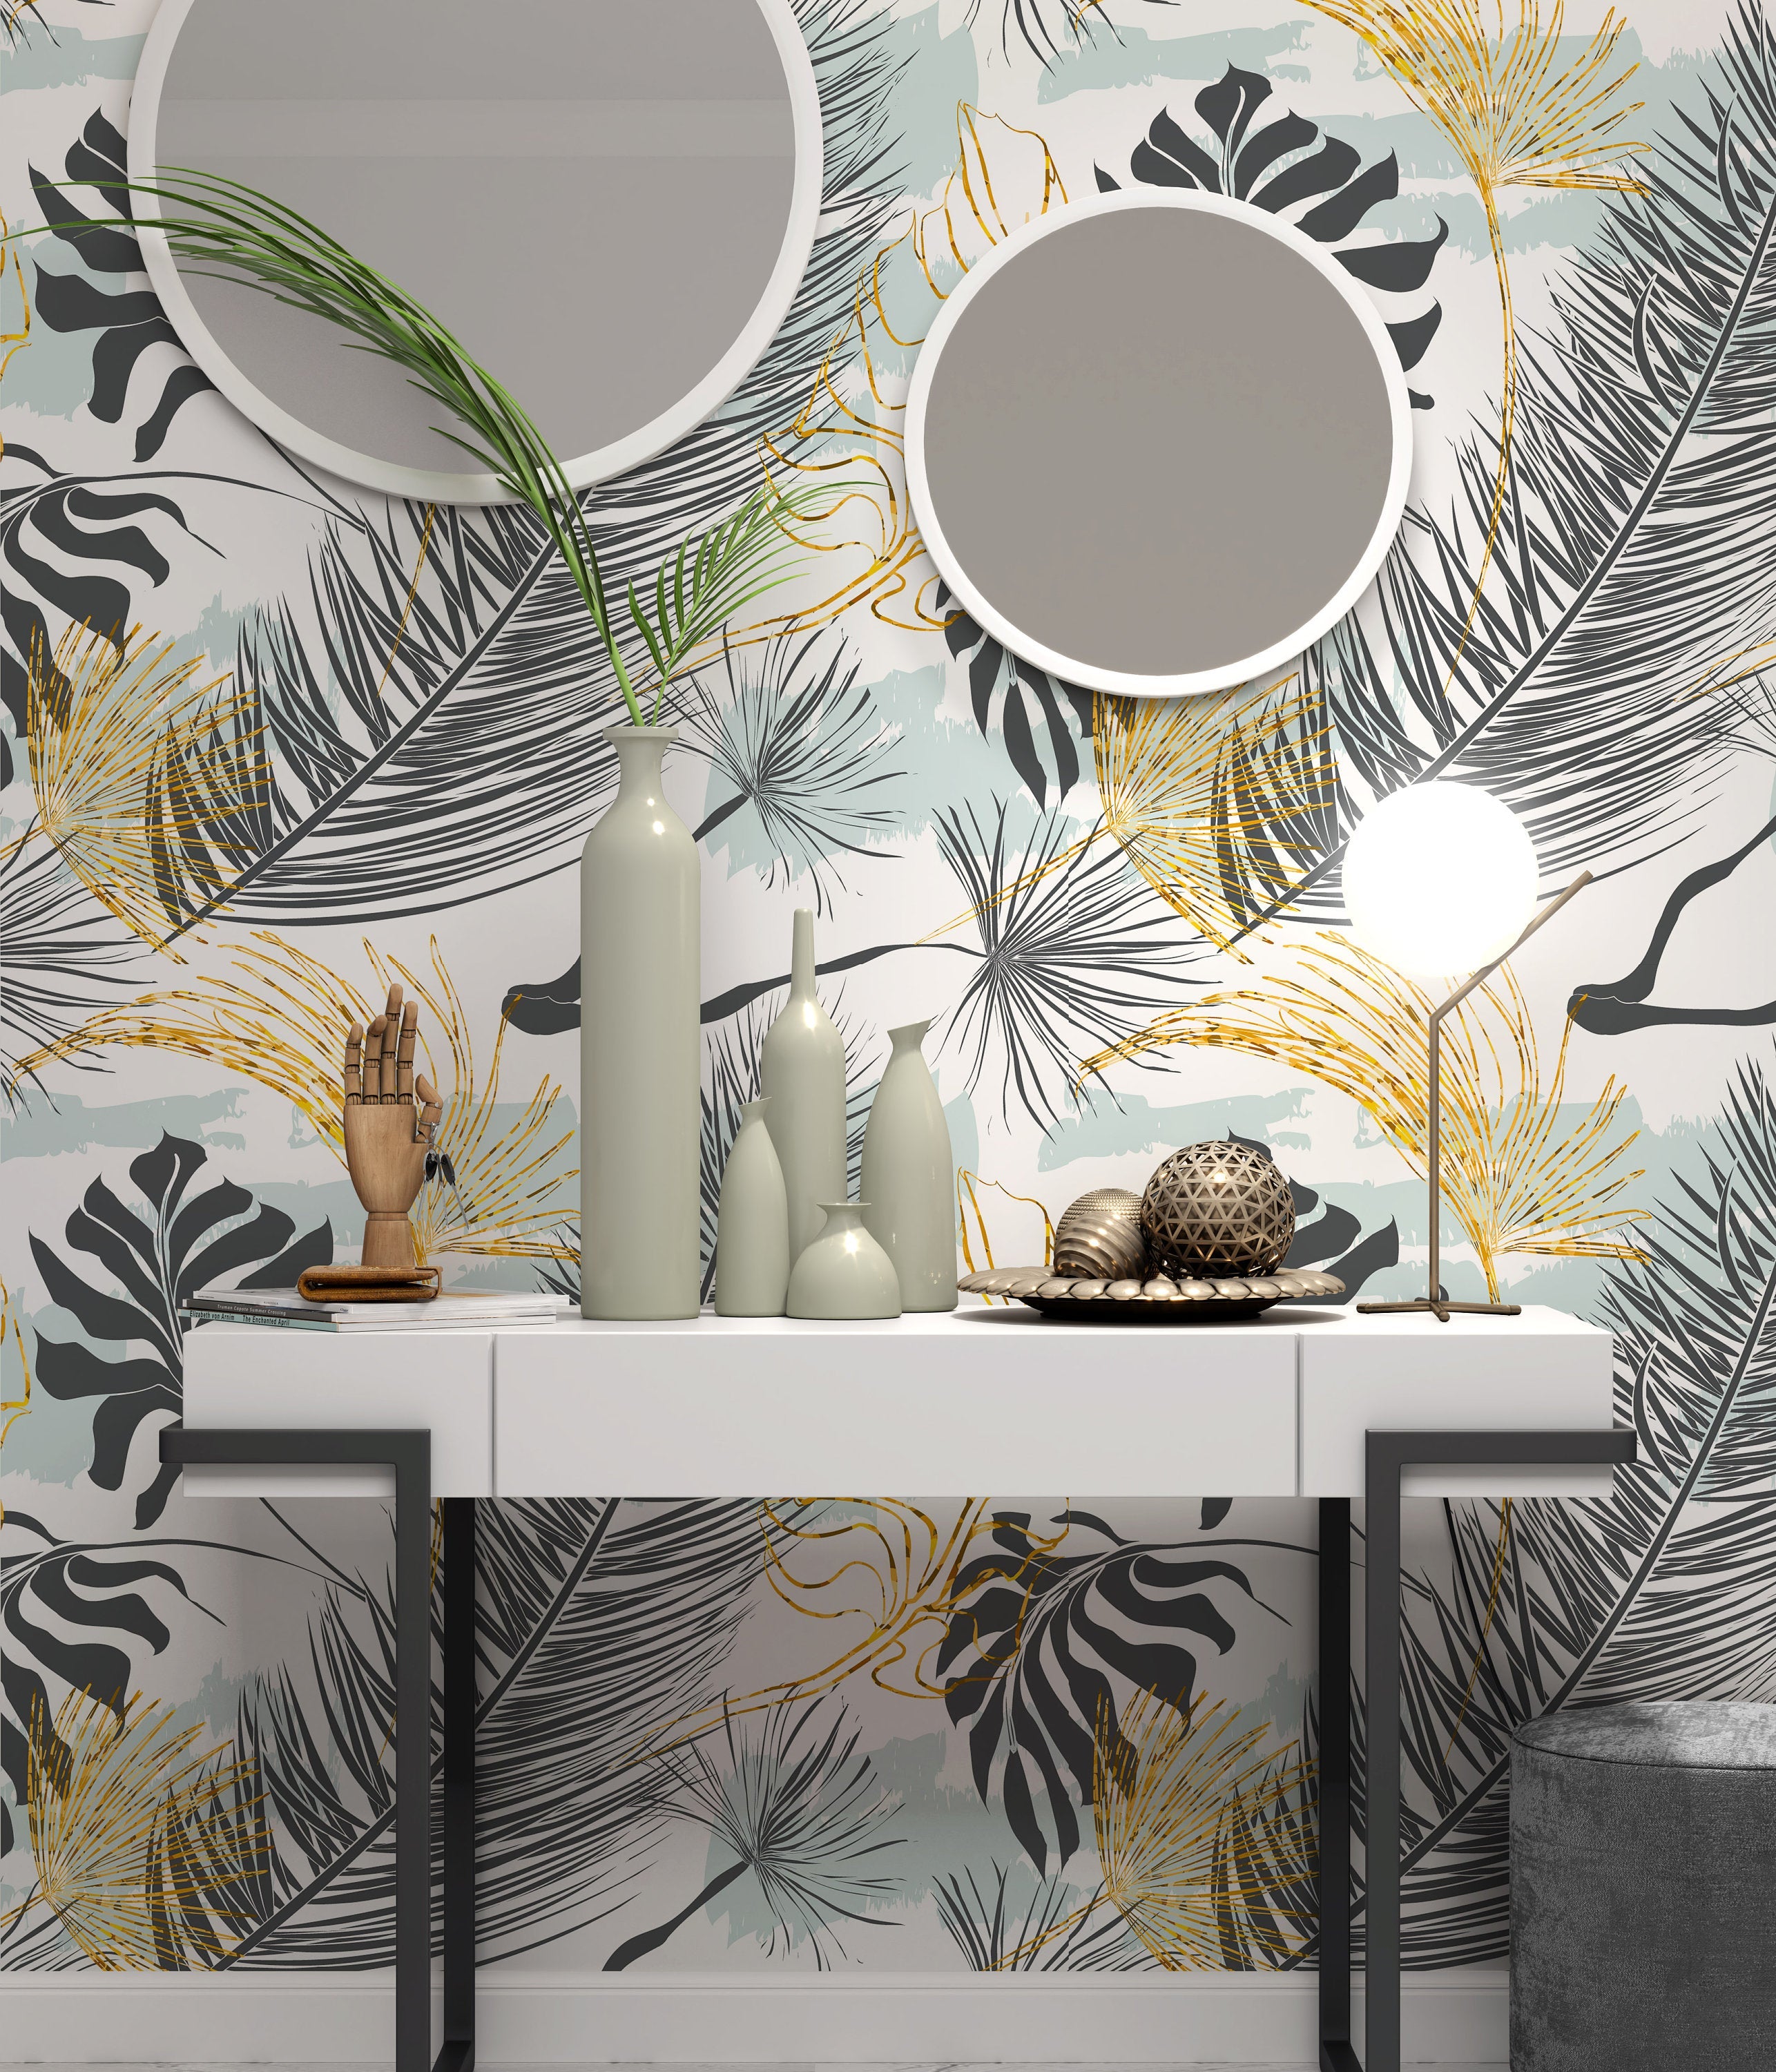 Tropical Banana Palm Leaves Flowers Trendy Design Wallpaper Self Adhesive Peel and Stick Wall Sticker Wall Decoration Removable